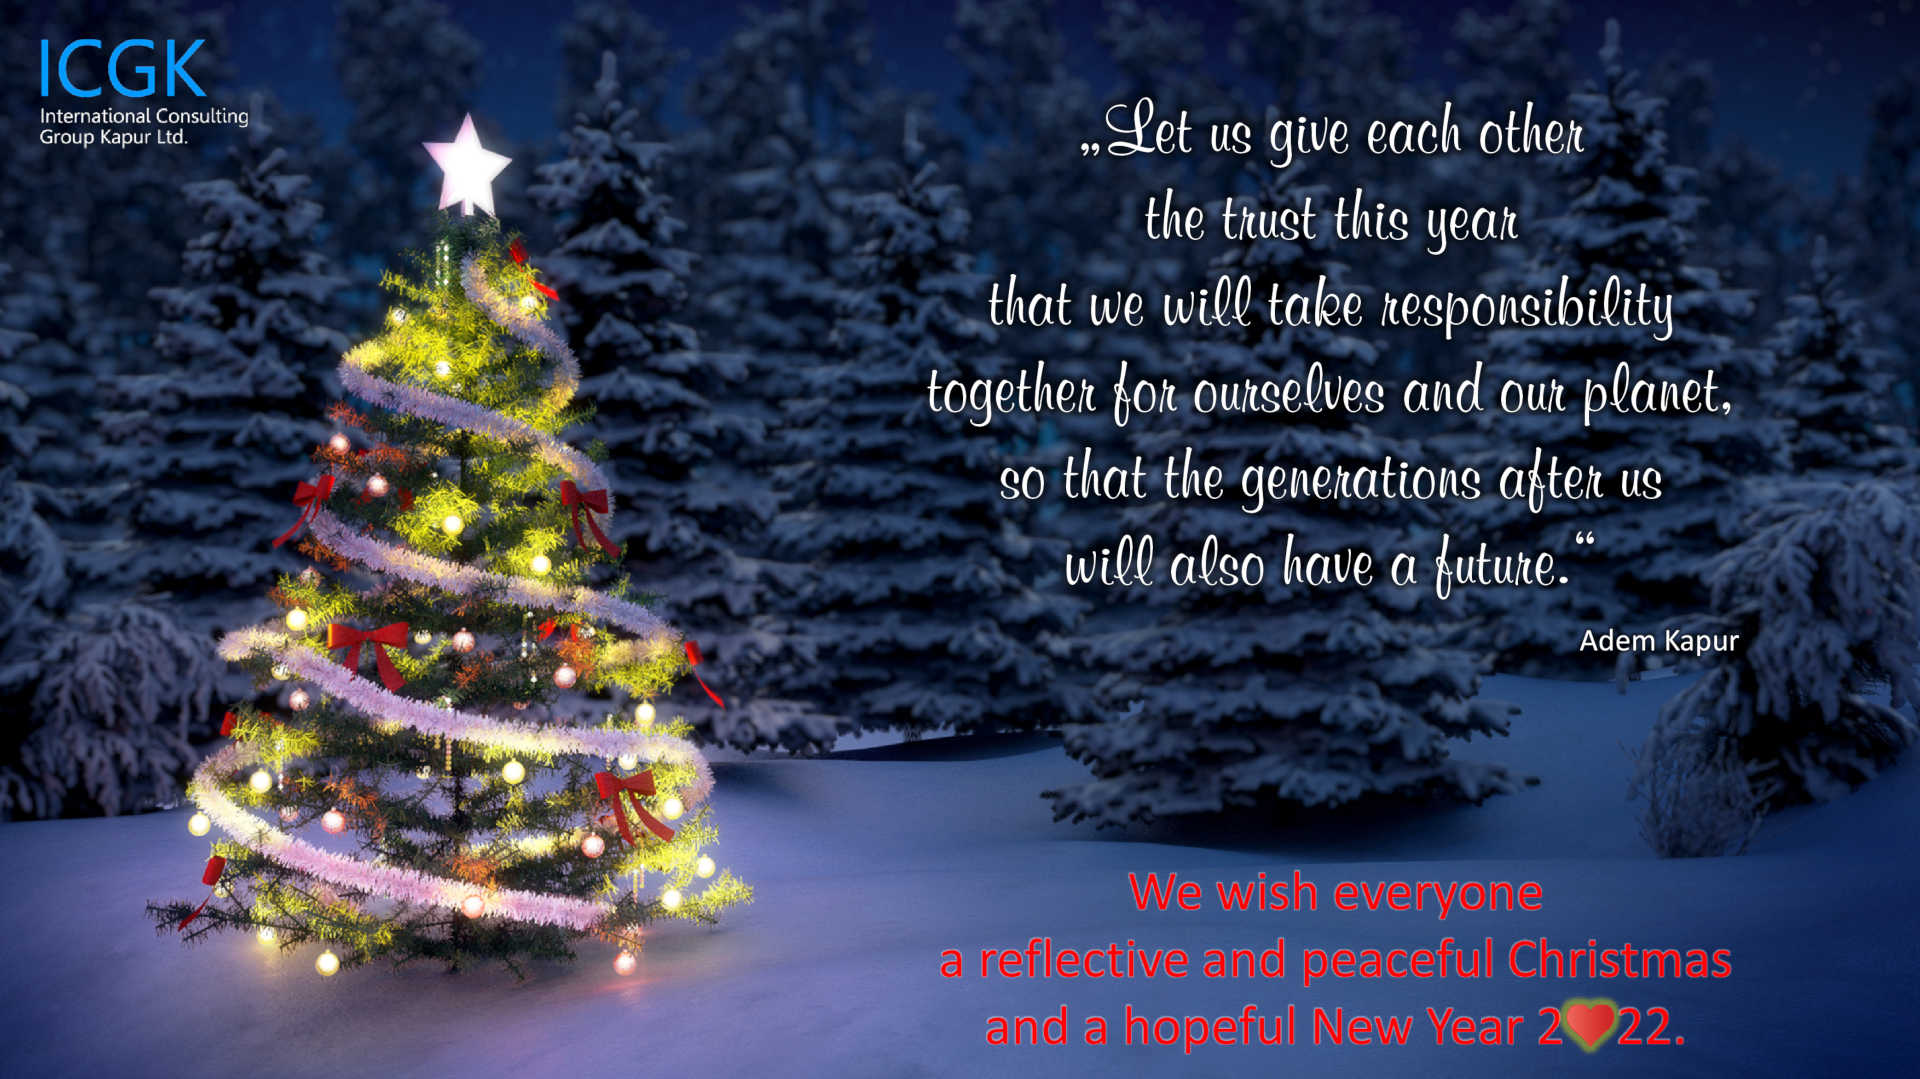 &quot;Let us give each other the trust this year that we will take responsibility together for ourselves and our planet, so that the generations after us will also have a future.&quot; (Adem Kapur) We wish everyone a reflective and peaceful Christmas and a hopeful New Year 2022.